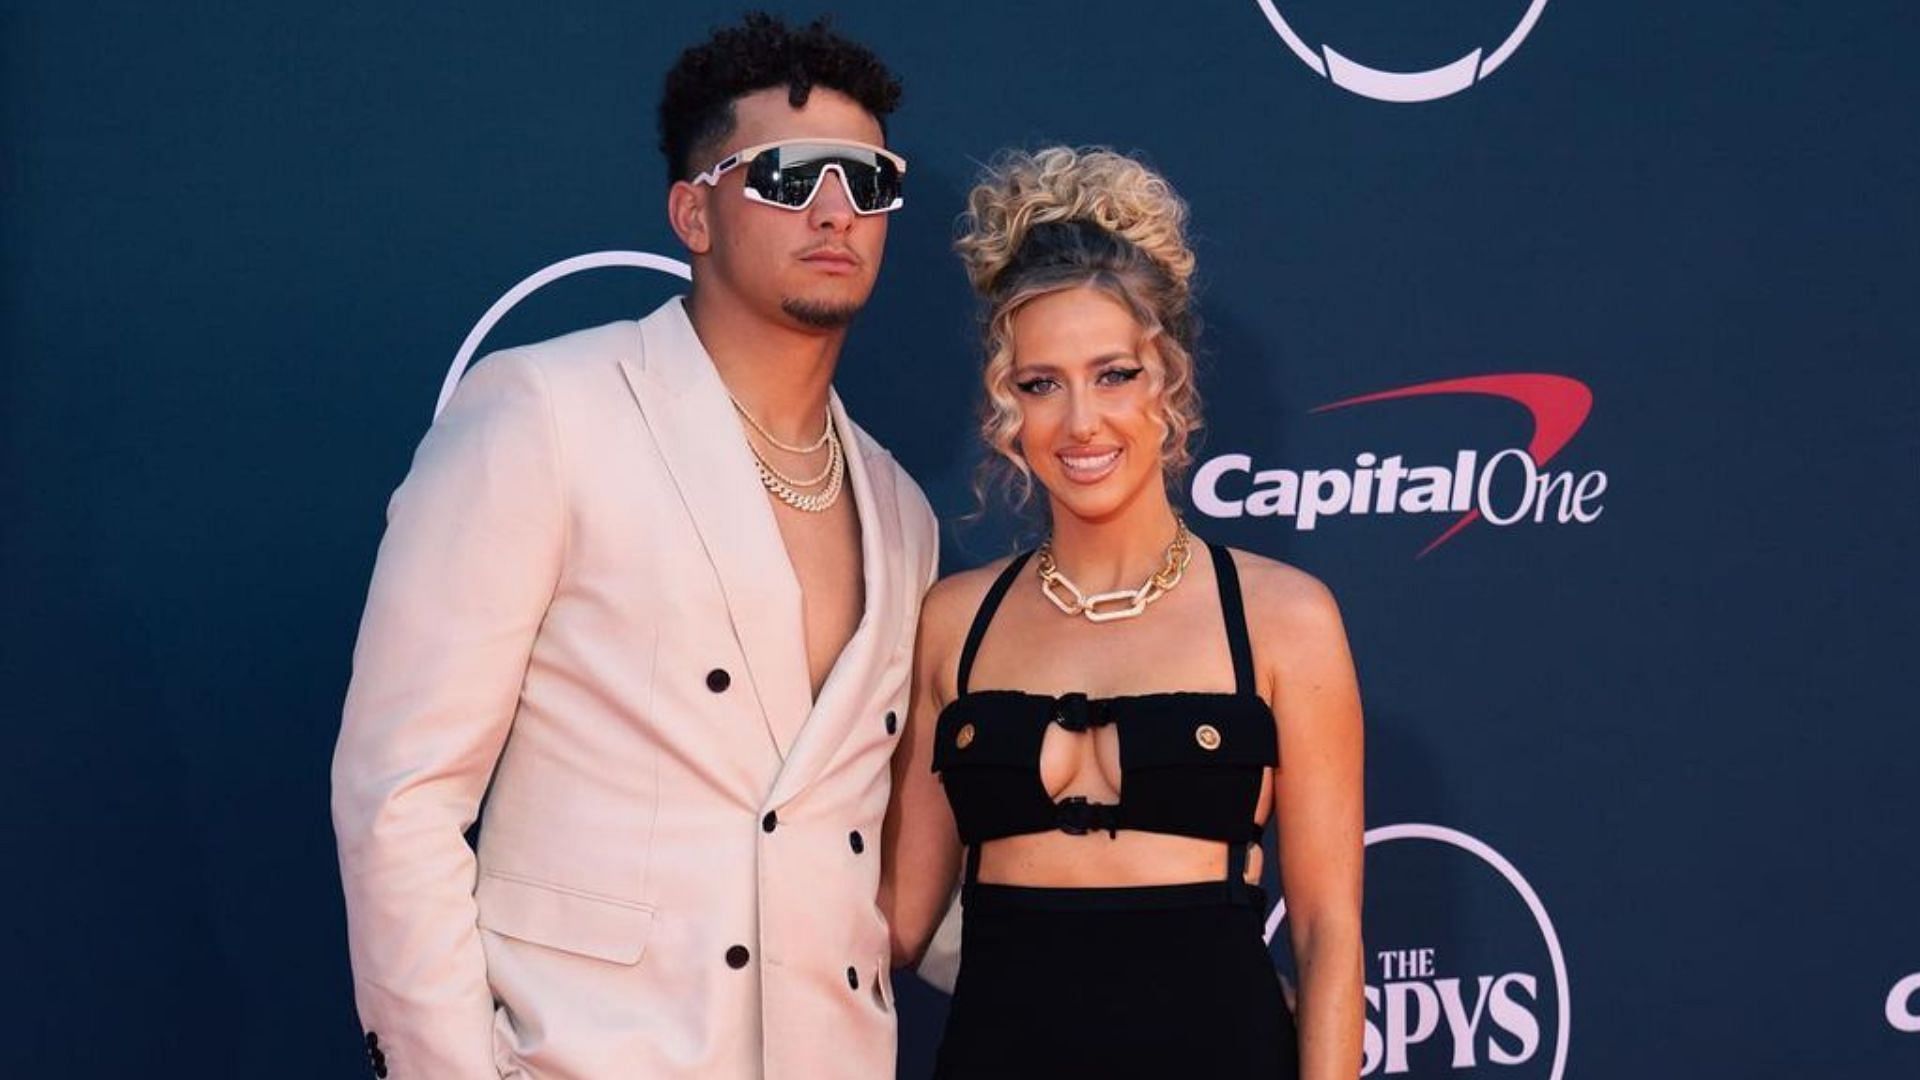 Patrick & Brittany Mahomes Are a Winning Team on ESPYS 2023 Red Carpet